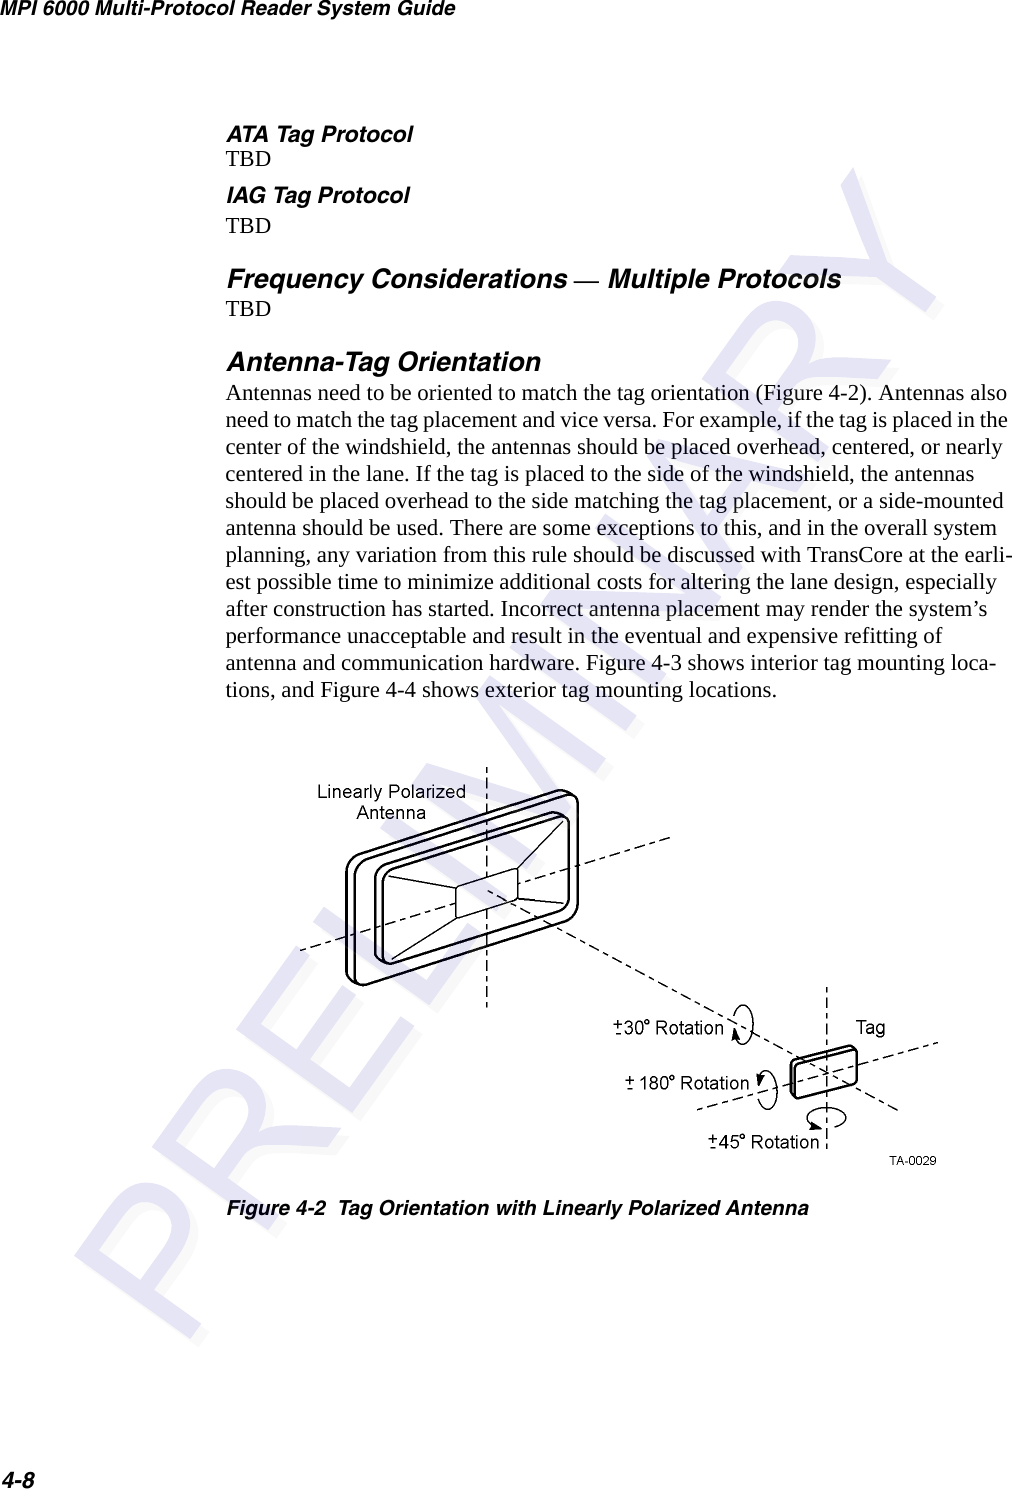 MPI 6000 Multi-Protocol Reader System Guide4-8ATA Tag ProtocolTBDIAG Tag ProtocolTBDFrequency Considerations — Multiple ProtocolsTBDAntenna-Tag OrientationAntennas need to be oriented to match the tag orientation (Figure 4-2). Antennas also need to match the tag placement and vice versa. For example, if the tag is placed in the center of the windshield, the antennas should be placed overhead, centered, or nearly centered in the lane. If the tag is placed to the side of the windshield, the antennas should be placed overhead to the side matching the tag placement, or a side-mounted antenna should be used. There are some exceptions to this, and in the overall system planning, any variation from this rule should be discussed with TransCore at the earli-est possible time to minimize additional costs for altering the lane design, especially after construction has started. Incorrect antenna placement may render the system’s performance unacceptable and result in the eventual and expensive refitting of antenna and communication hardware. Figure 4-3 shows interior tag mounting loca-tions, and Figure 4-4 shows exterior tag mounting locations.Figure 4-2  Tag Orientation with Linearly Polarized Antenna